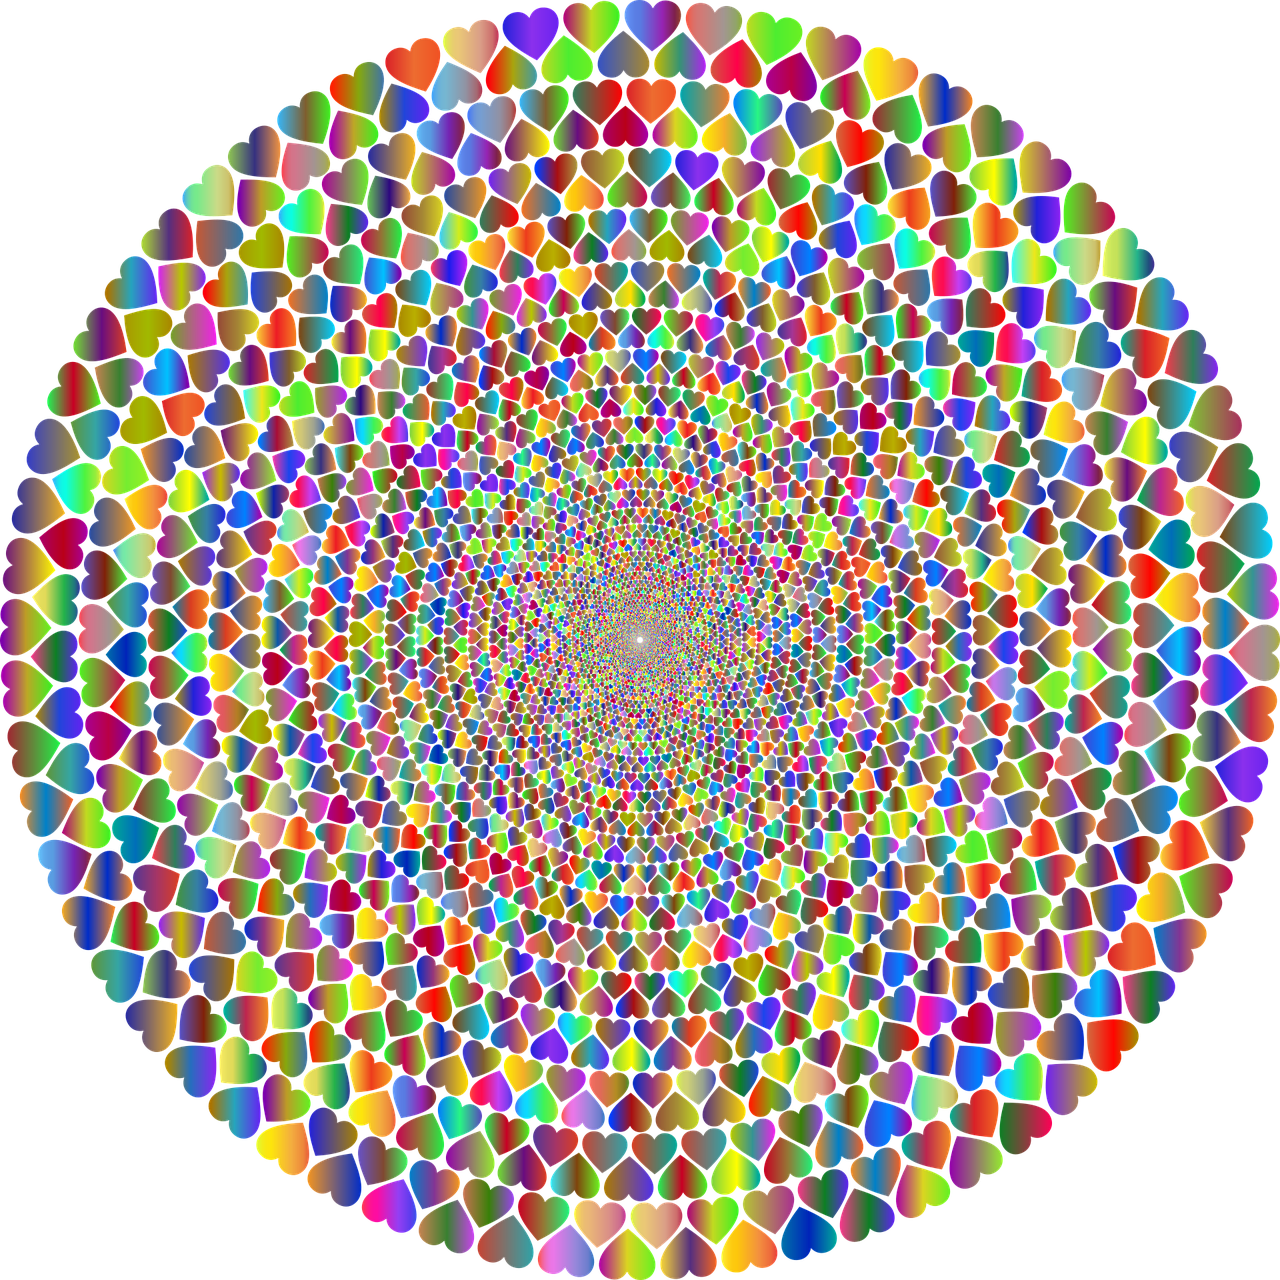 a multicolored circle on a black background, a raytraced image, inspired by Benoit B. Mandelbrot, kinetic pointillism, many hearts, glass mosaic, psychedelic illustration